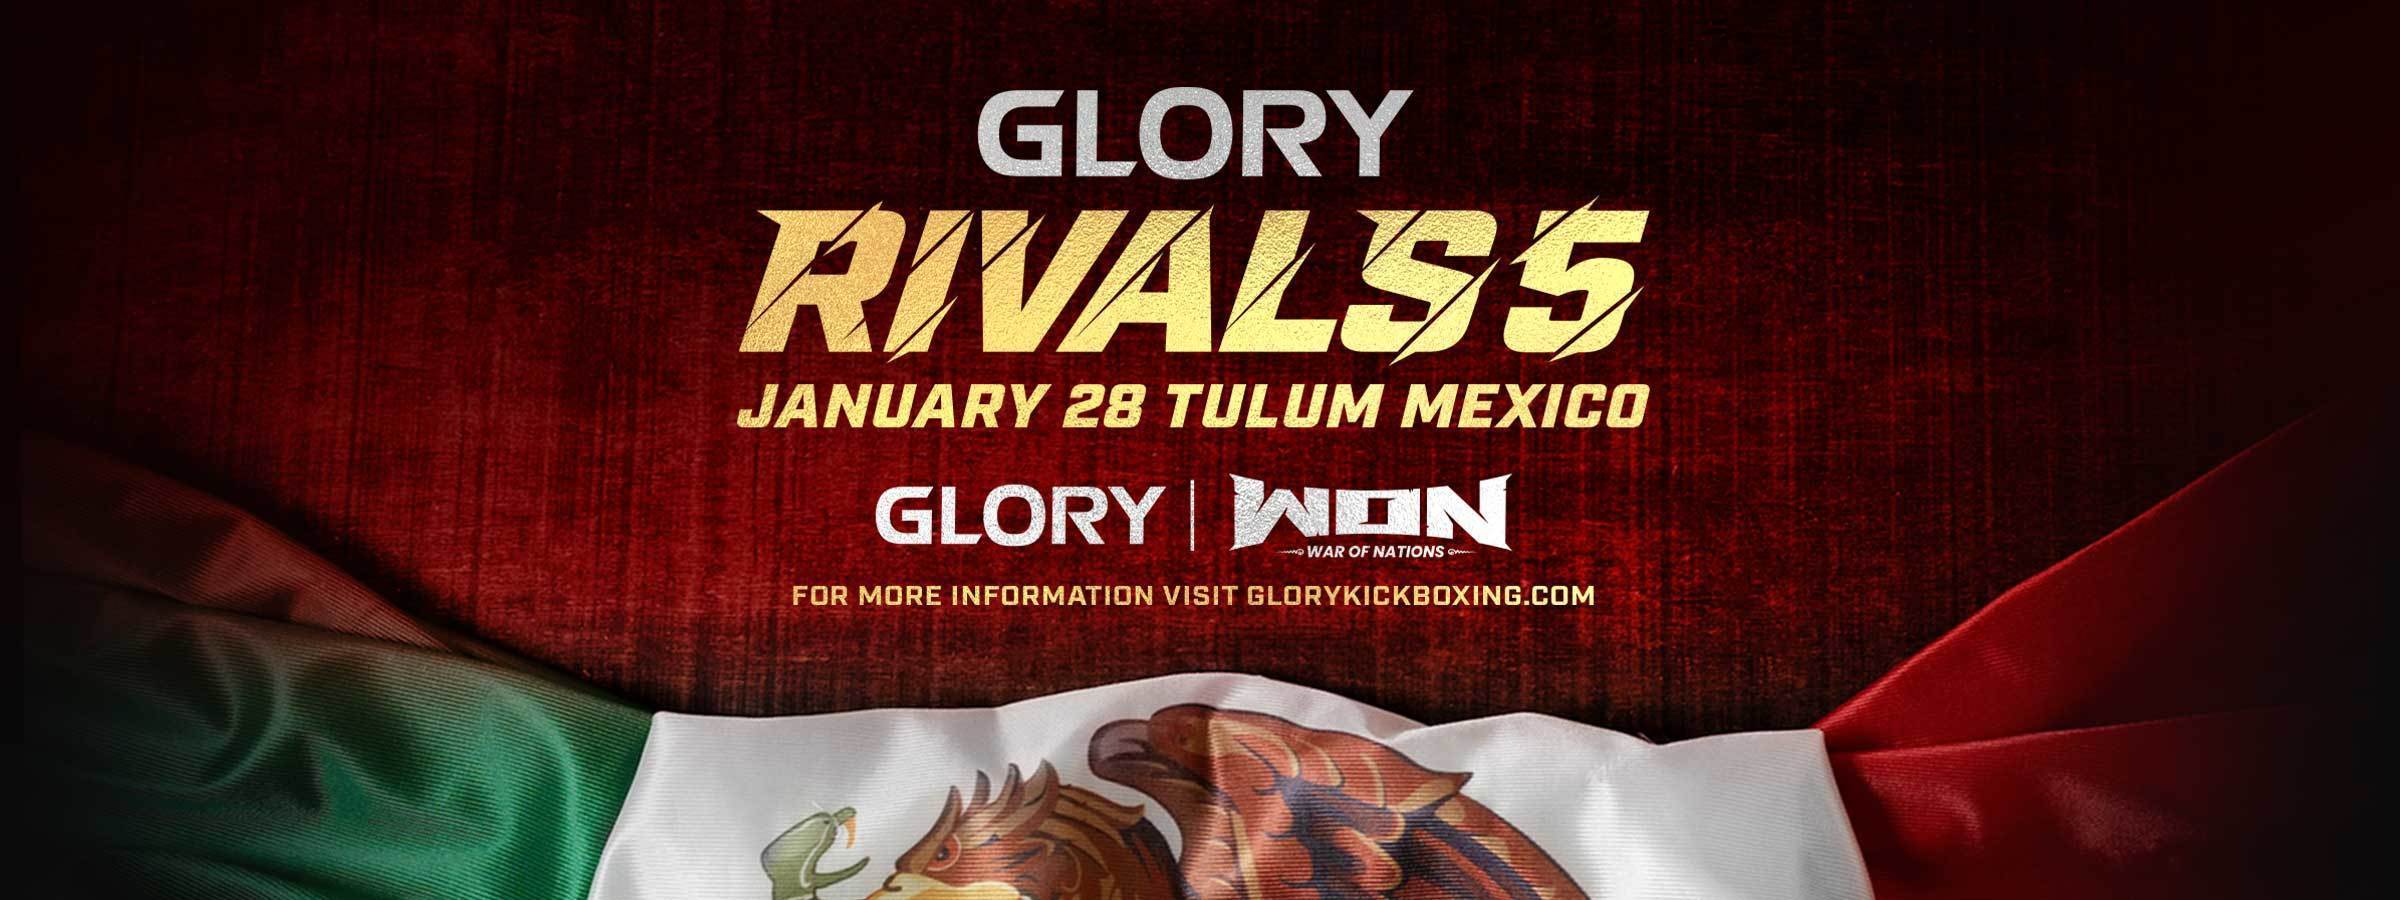 GLORY RIVALS 5 FIGHT CARD FINALIZED